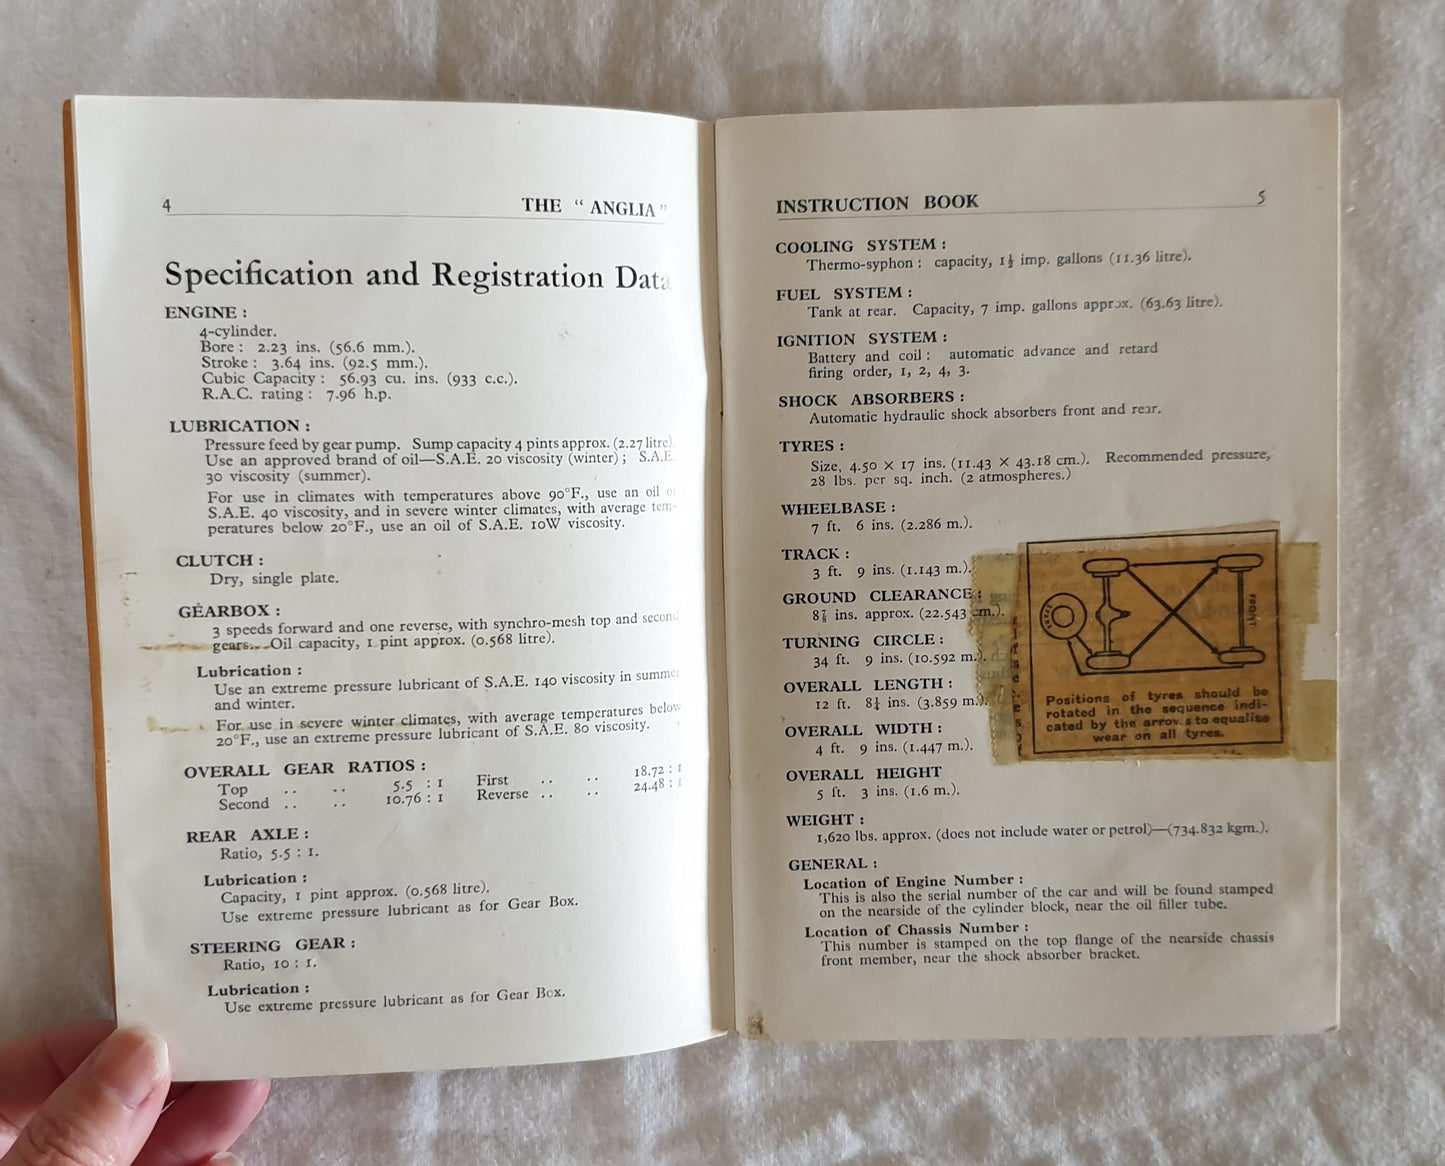 The Anglia Saloon Instruction Book